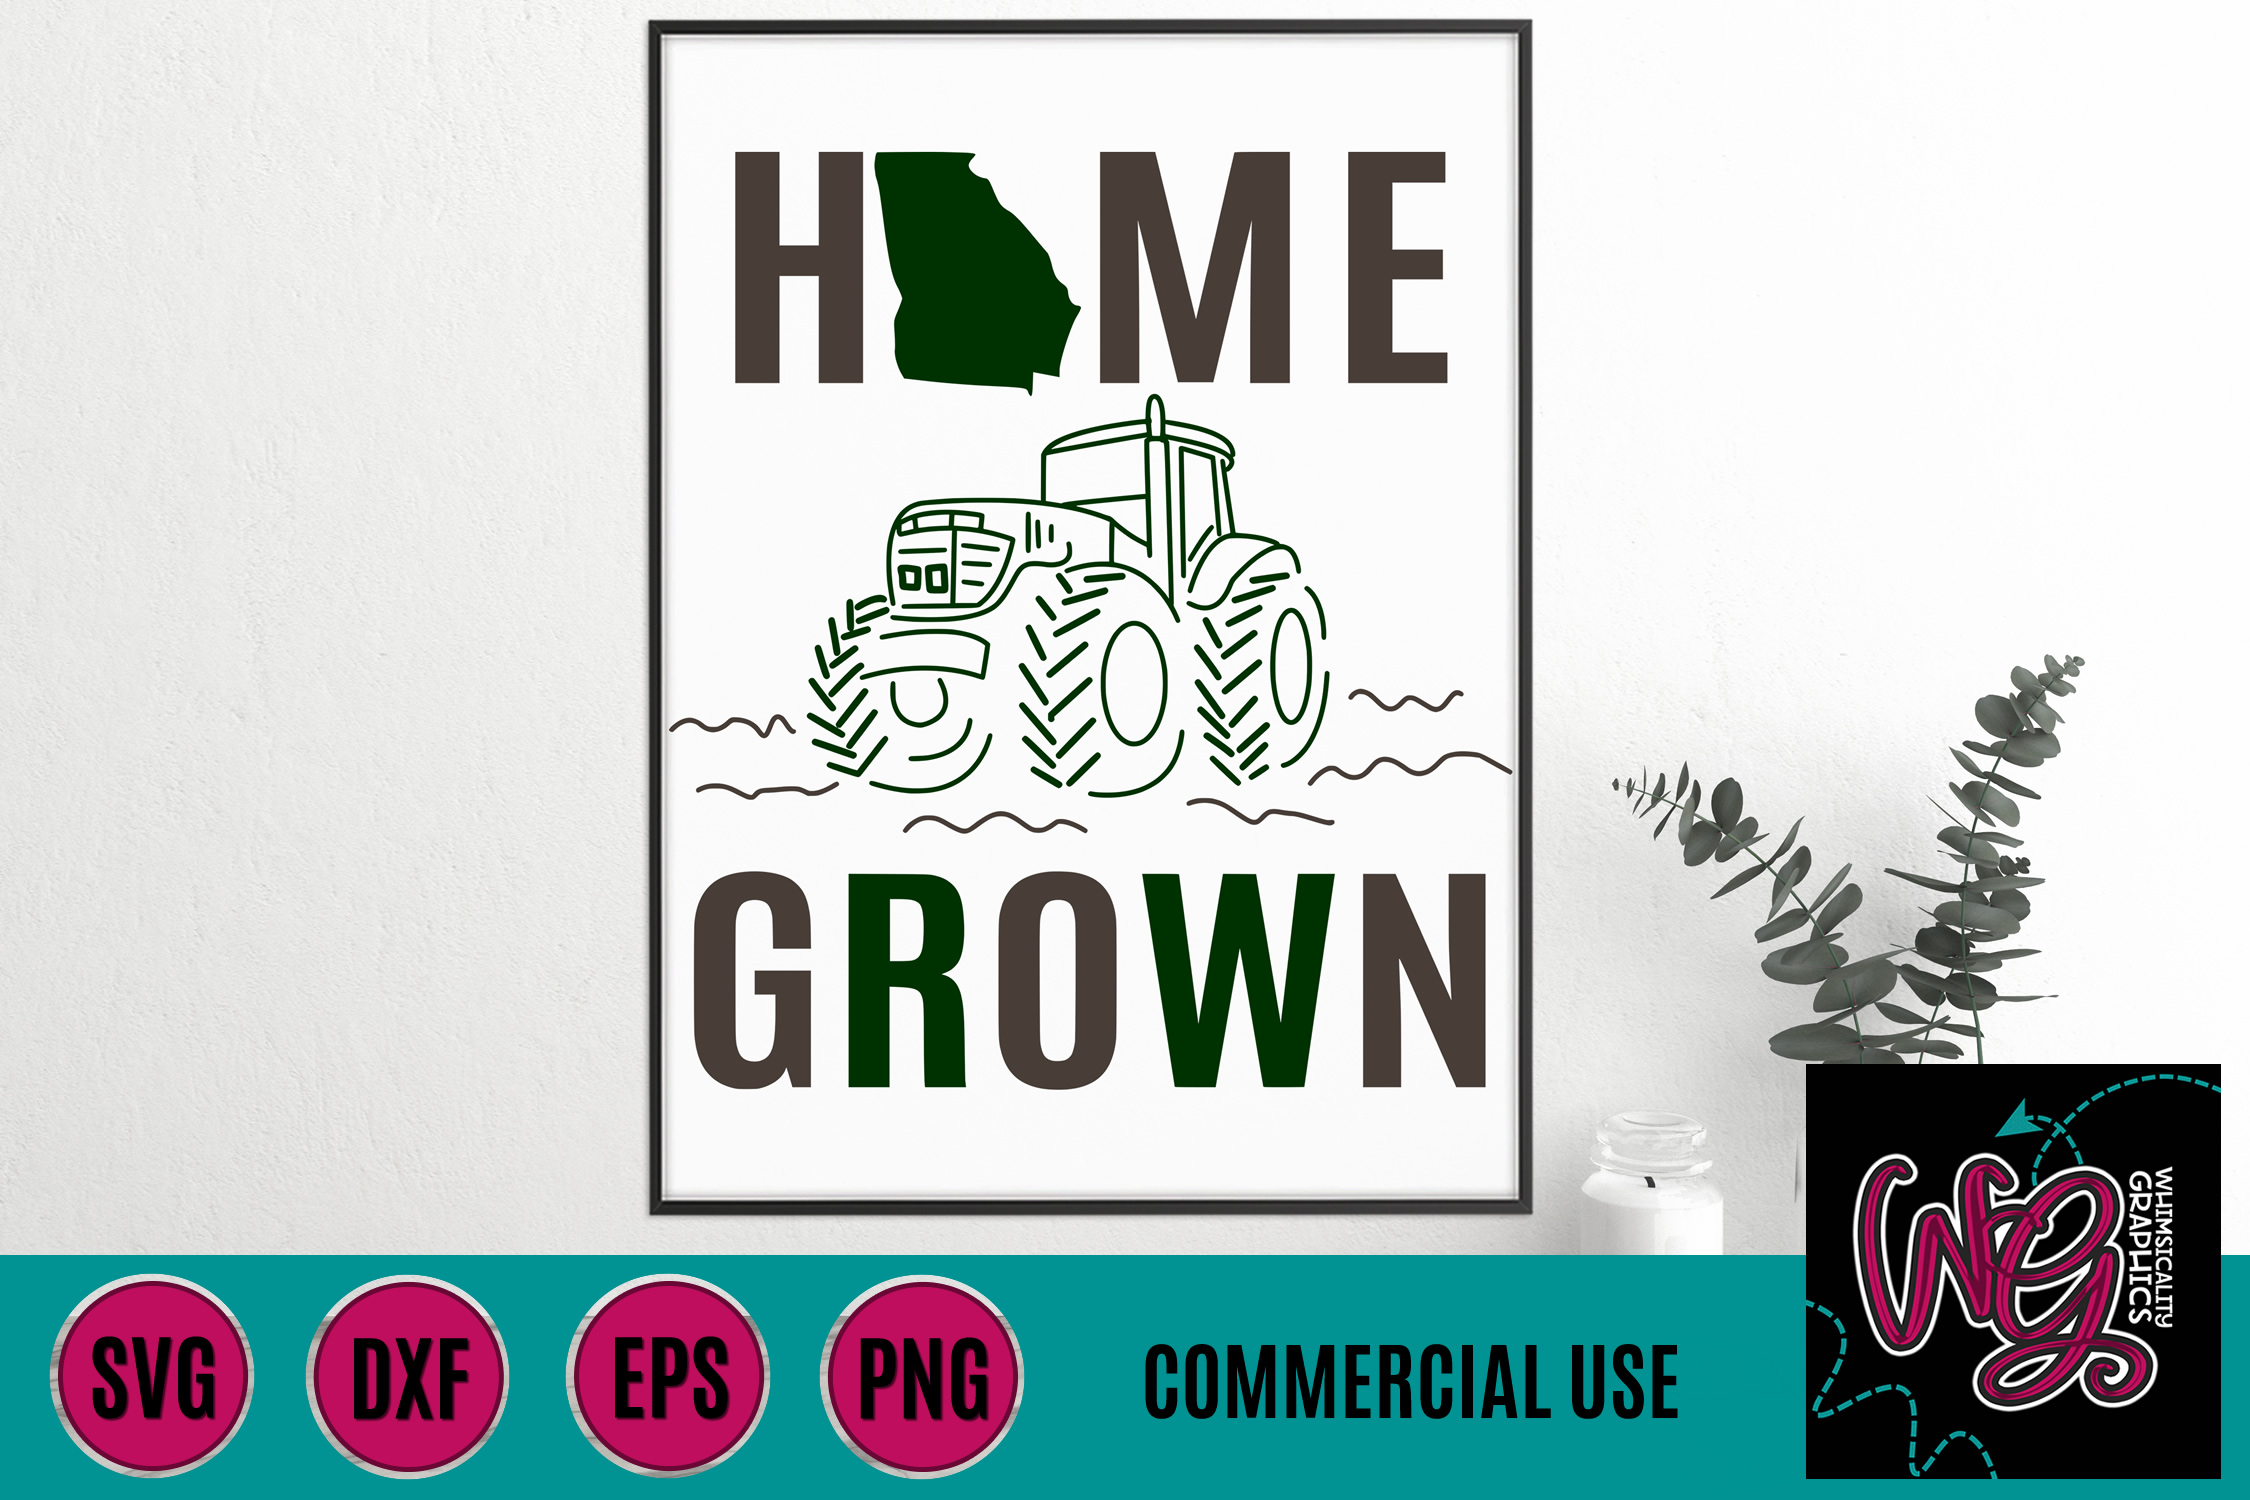 Download Home Grown Tractor With States SVG, DXF, PNG, EPS Comm ...